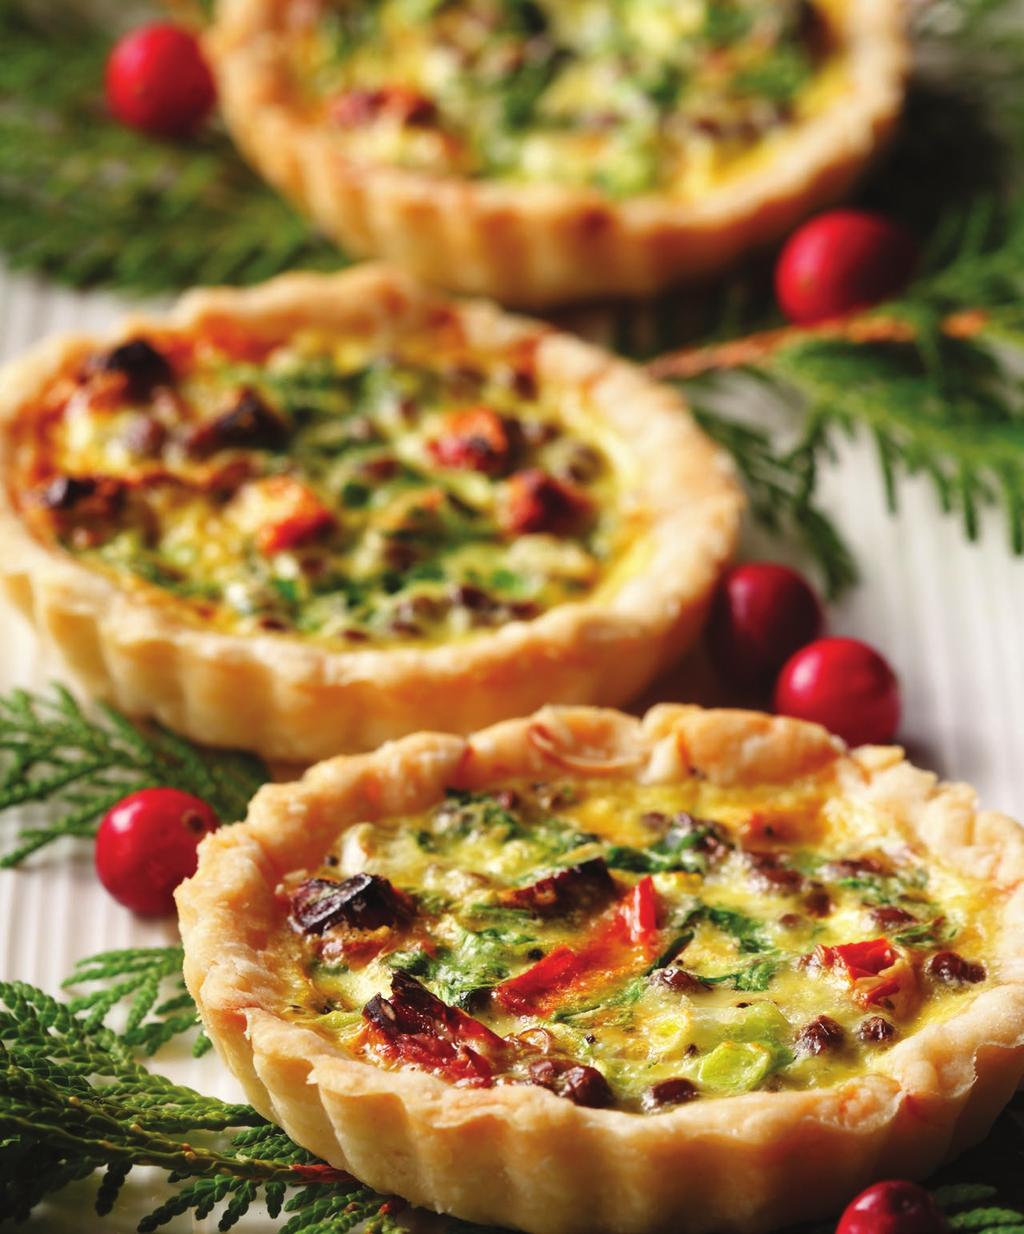 KALE, LENTIL & SUNDRIED TOMATO QUICHE 1 deep dish pie crust, packaged/frozen 1 /3 cup (80 ml) grated Swiss cheese (or your favourite cheese) 2 Tbsp (30 ml) chopped sundried tomatoes (in oil or dry &